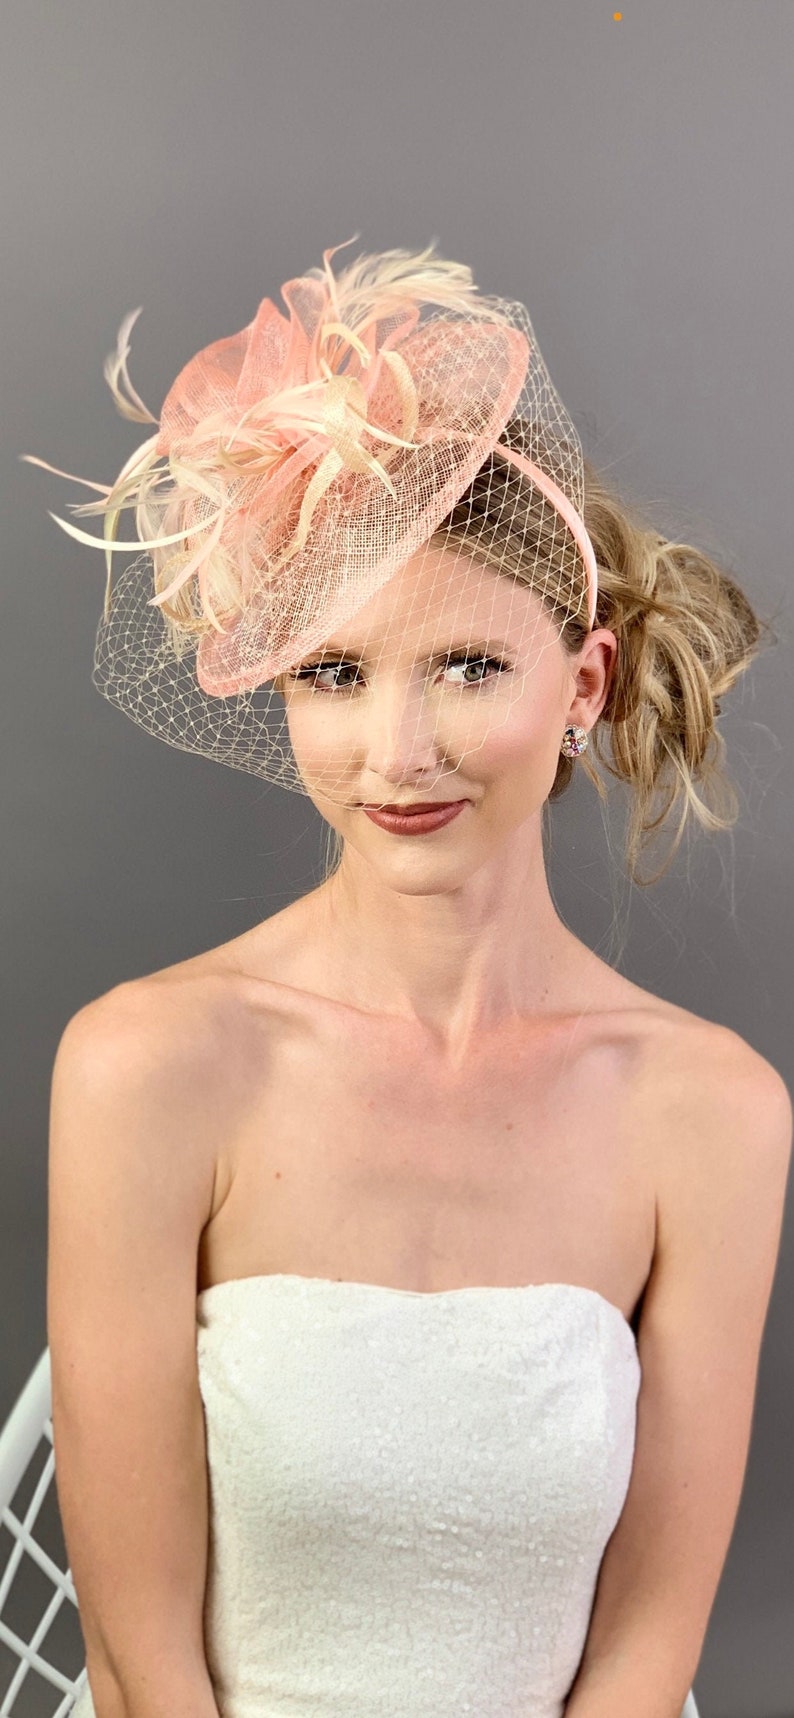 Peach and Champagne Fascinator on headband, The Brynlee, Women's High Tea Party Hat, Hat with Veil, Kentucky Derby Hat, wedding hat, image 3